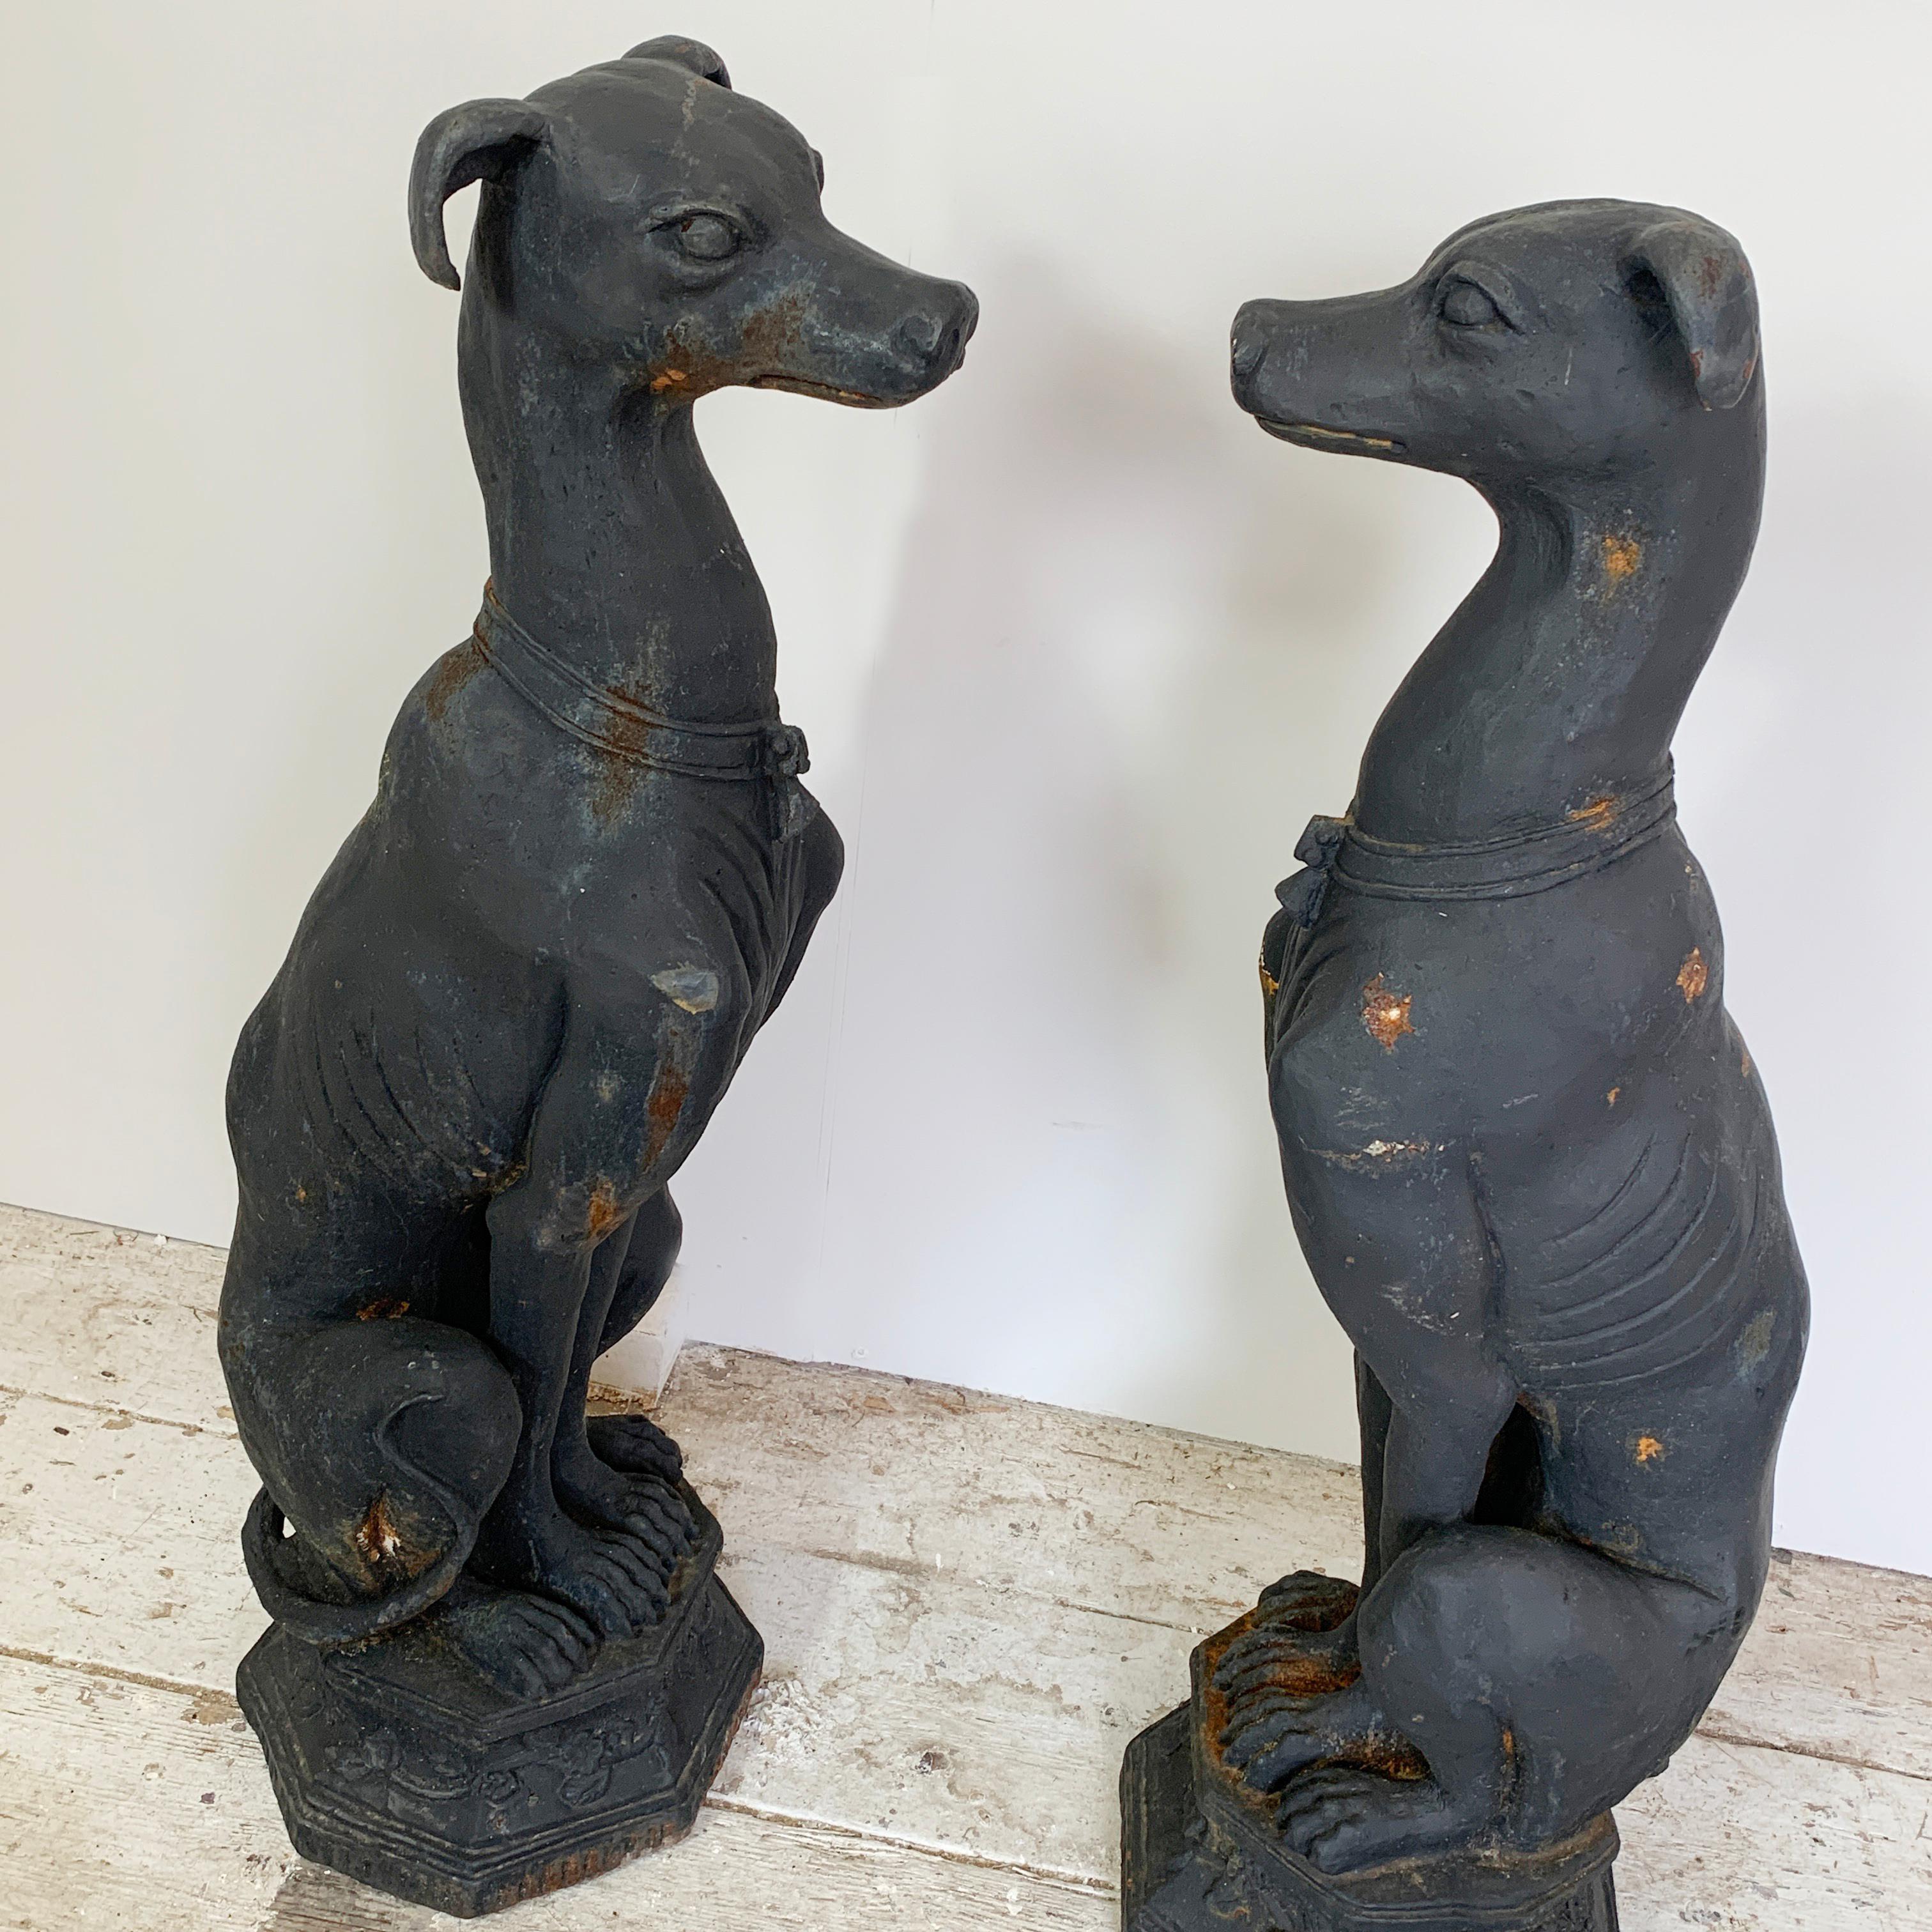 Pair of 19th century cast iron whippet statues
Impressive pair of garden whippet dogs, black colour with weathered finish
These dogs have been outside, probably on gateposts at an entrance
Measures: 80cm height, 25cm width, 25cm depth
These are